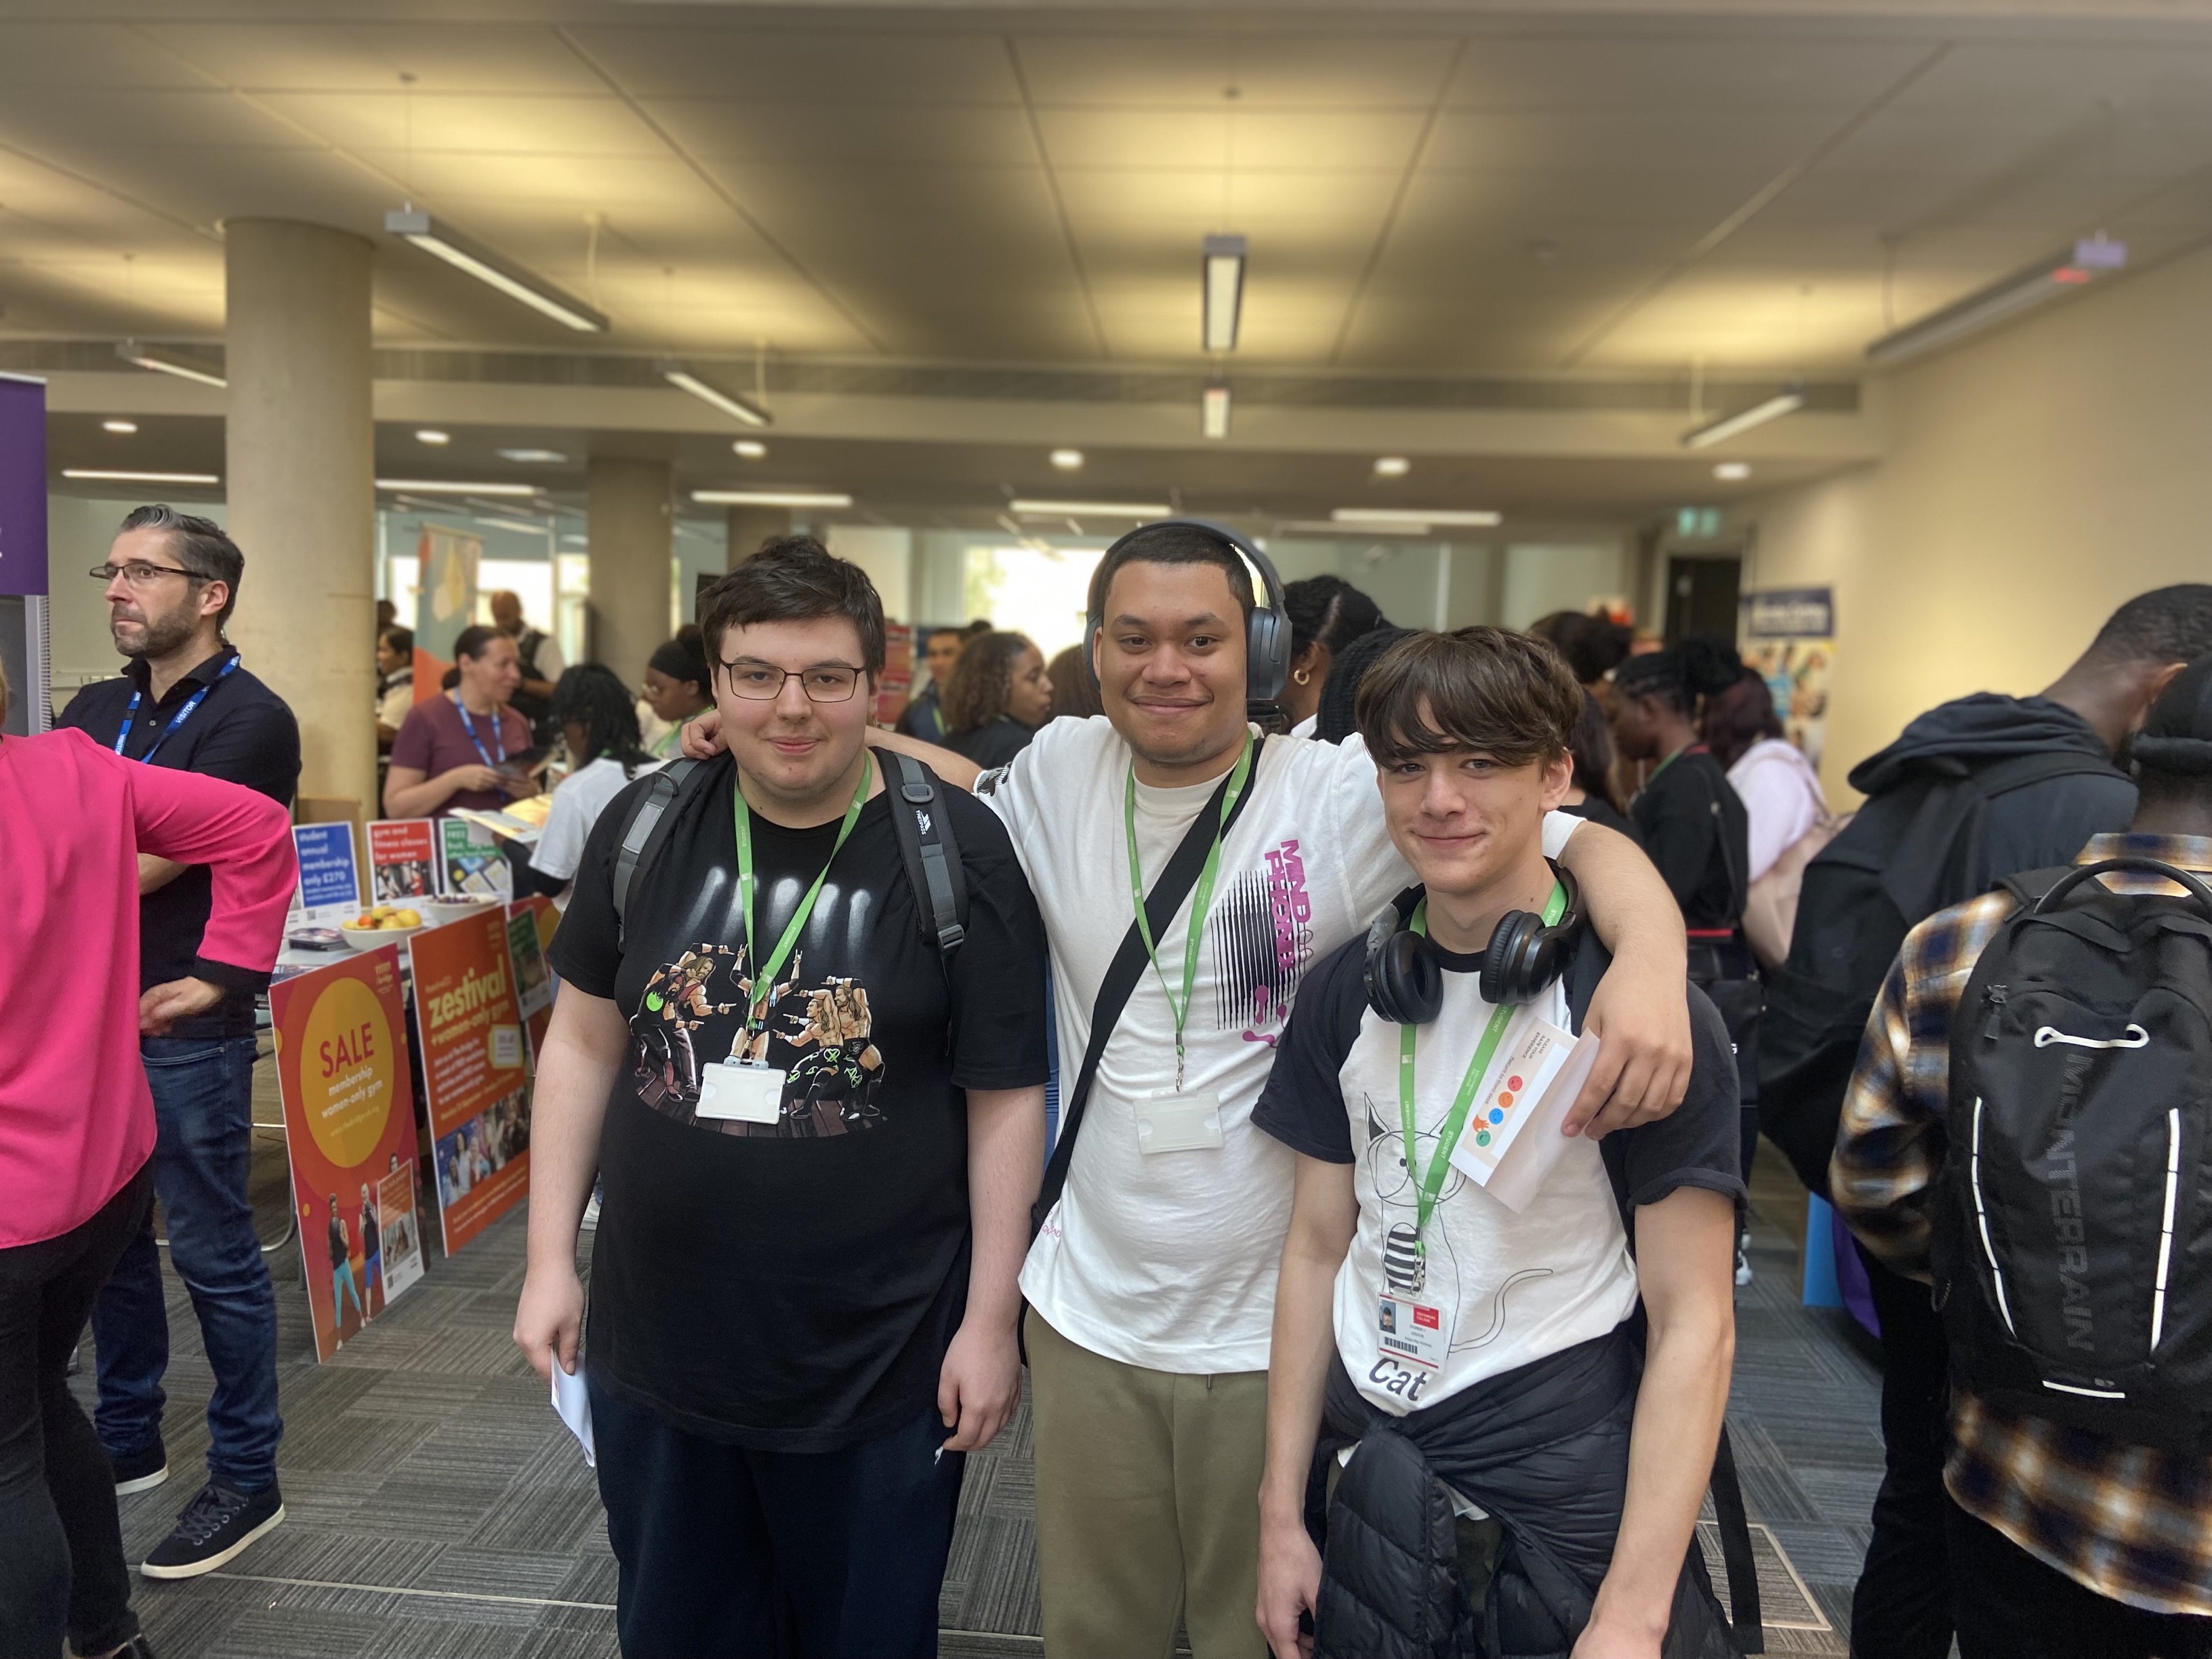 Southwark College welcomes new and returning students with a vibrant Freshers Fair